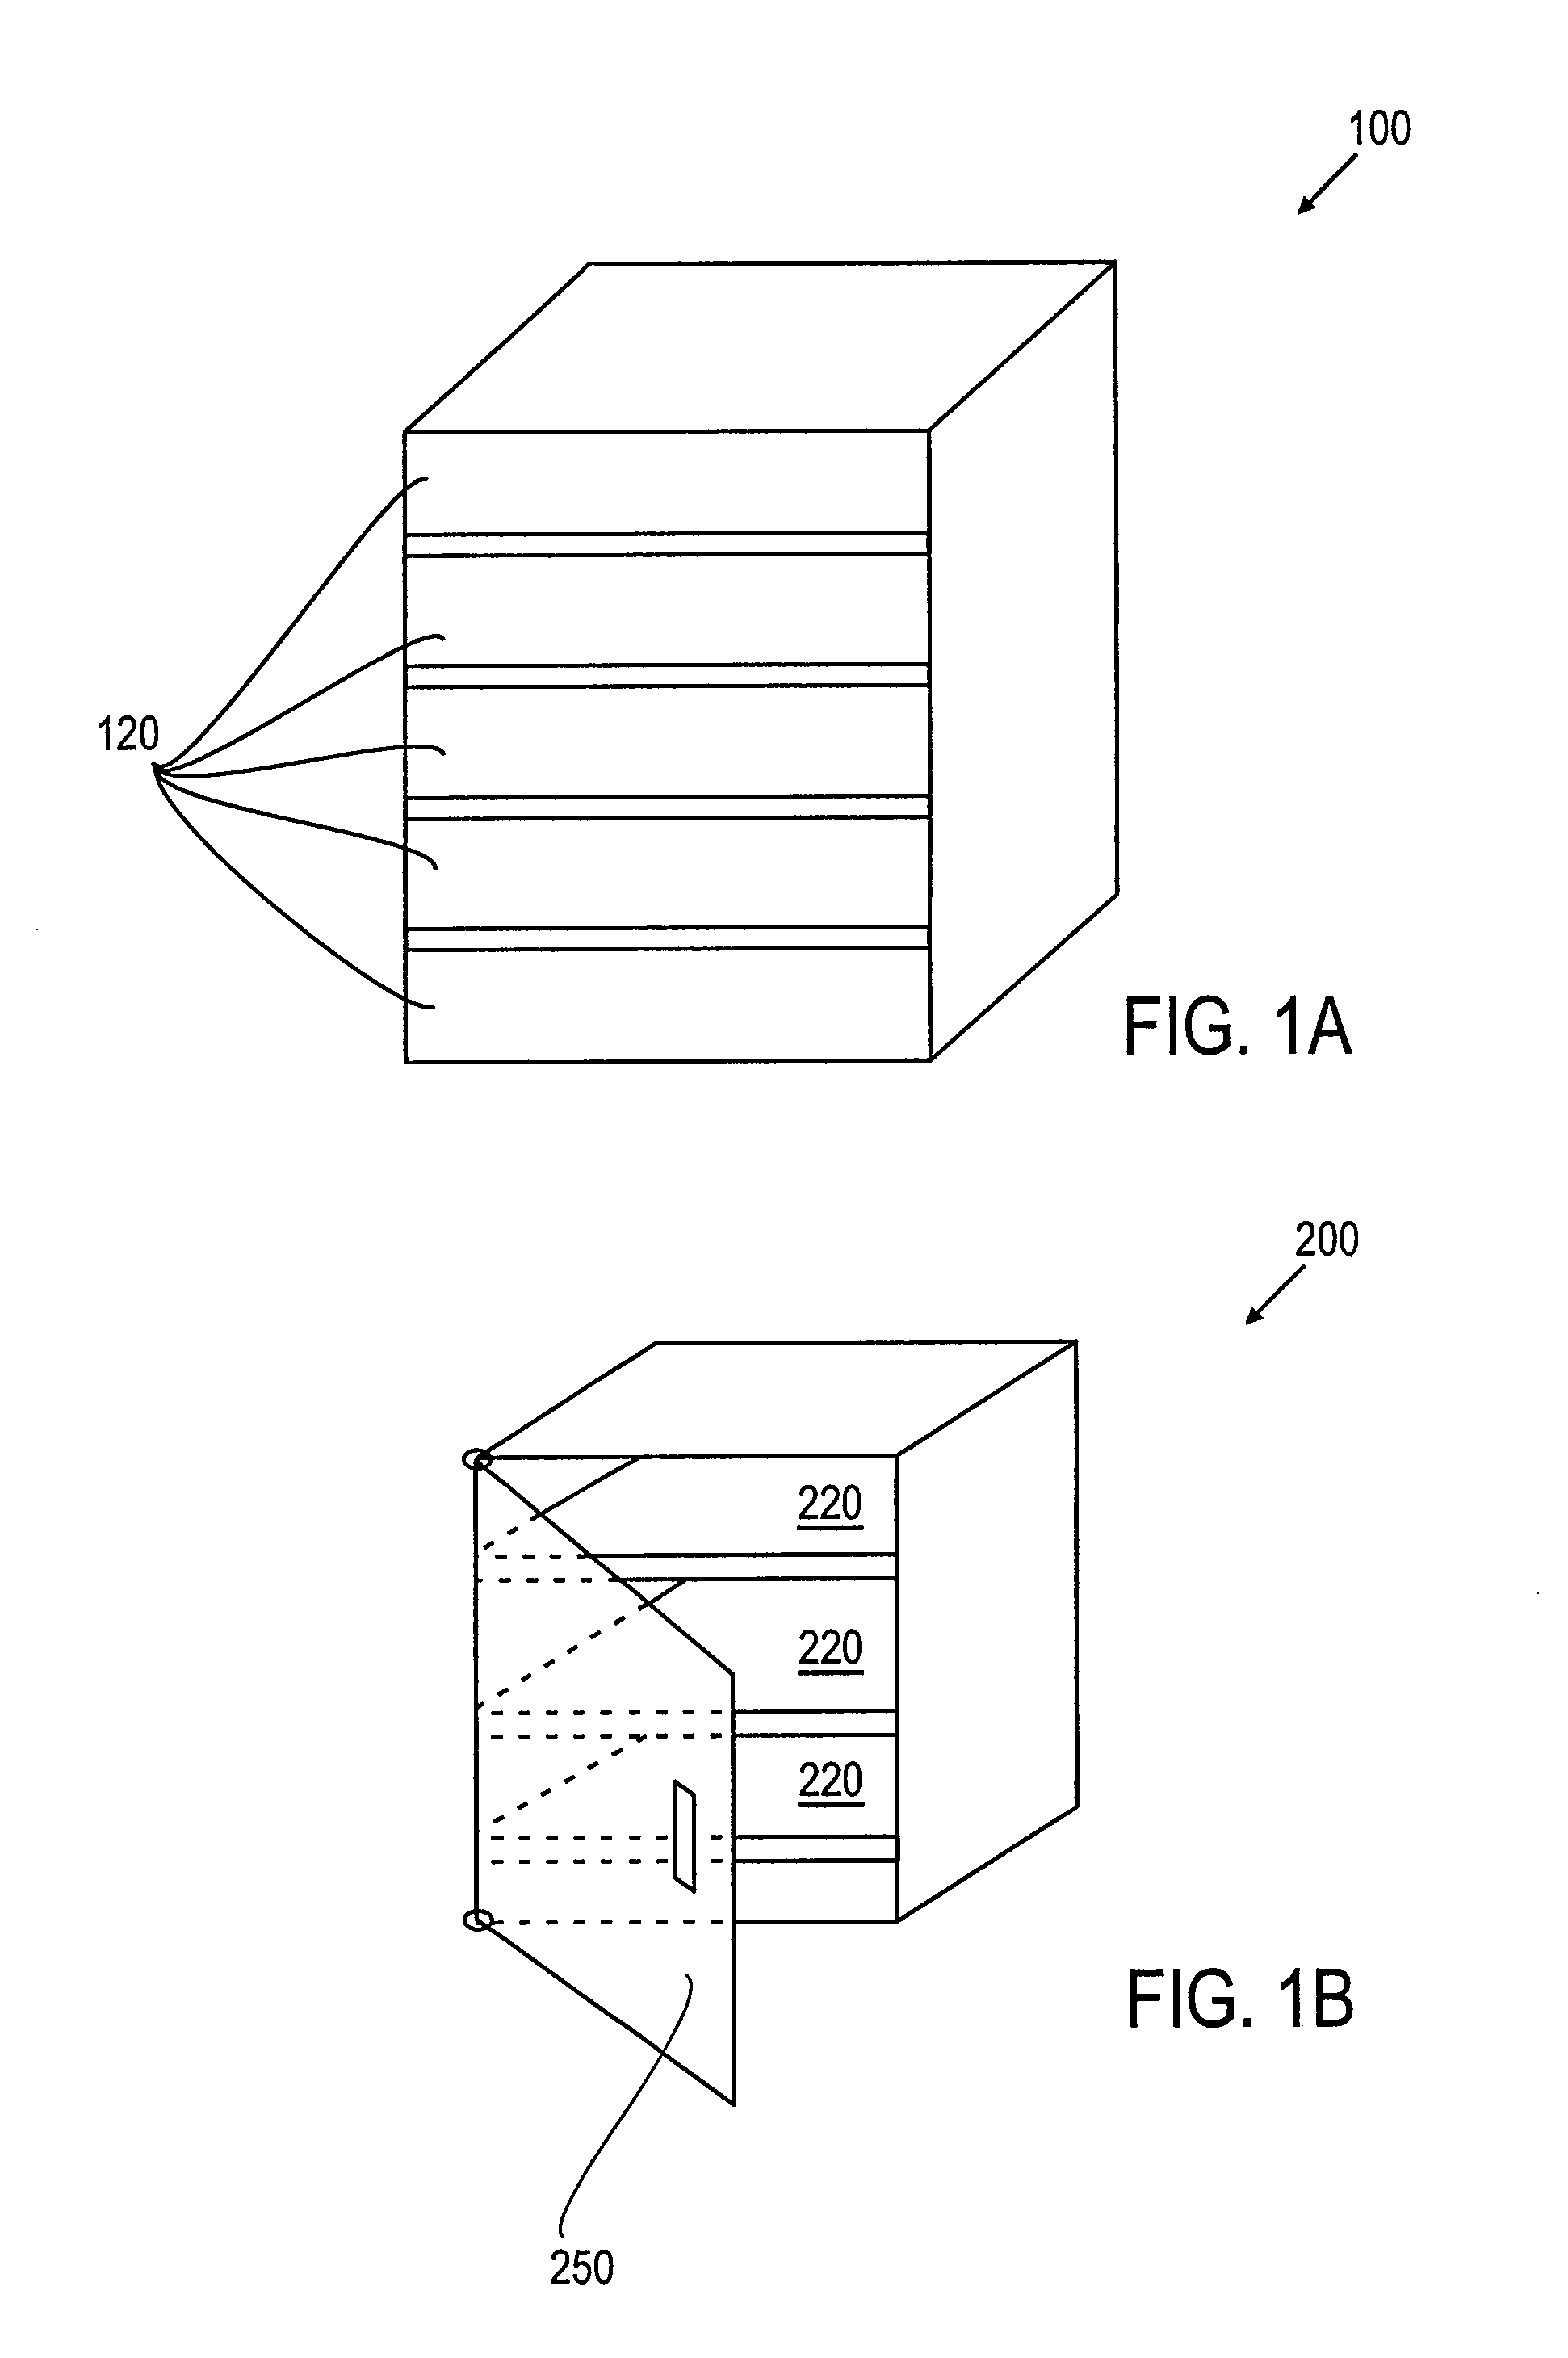 Image-based inventory control system using advanced image recognition